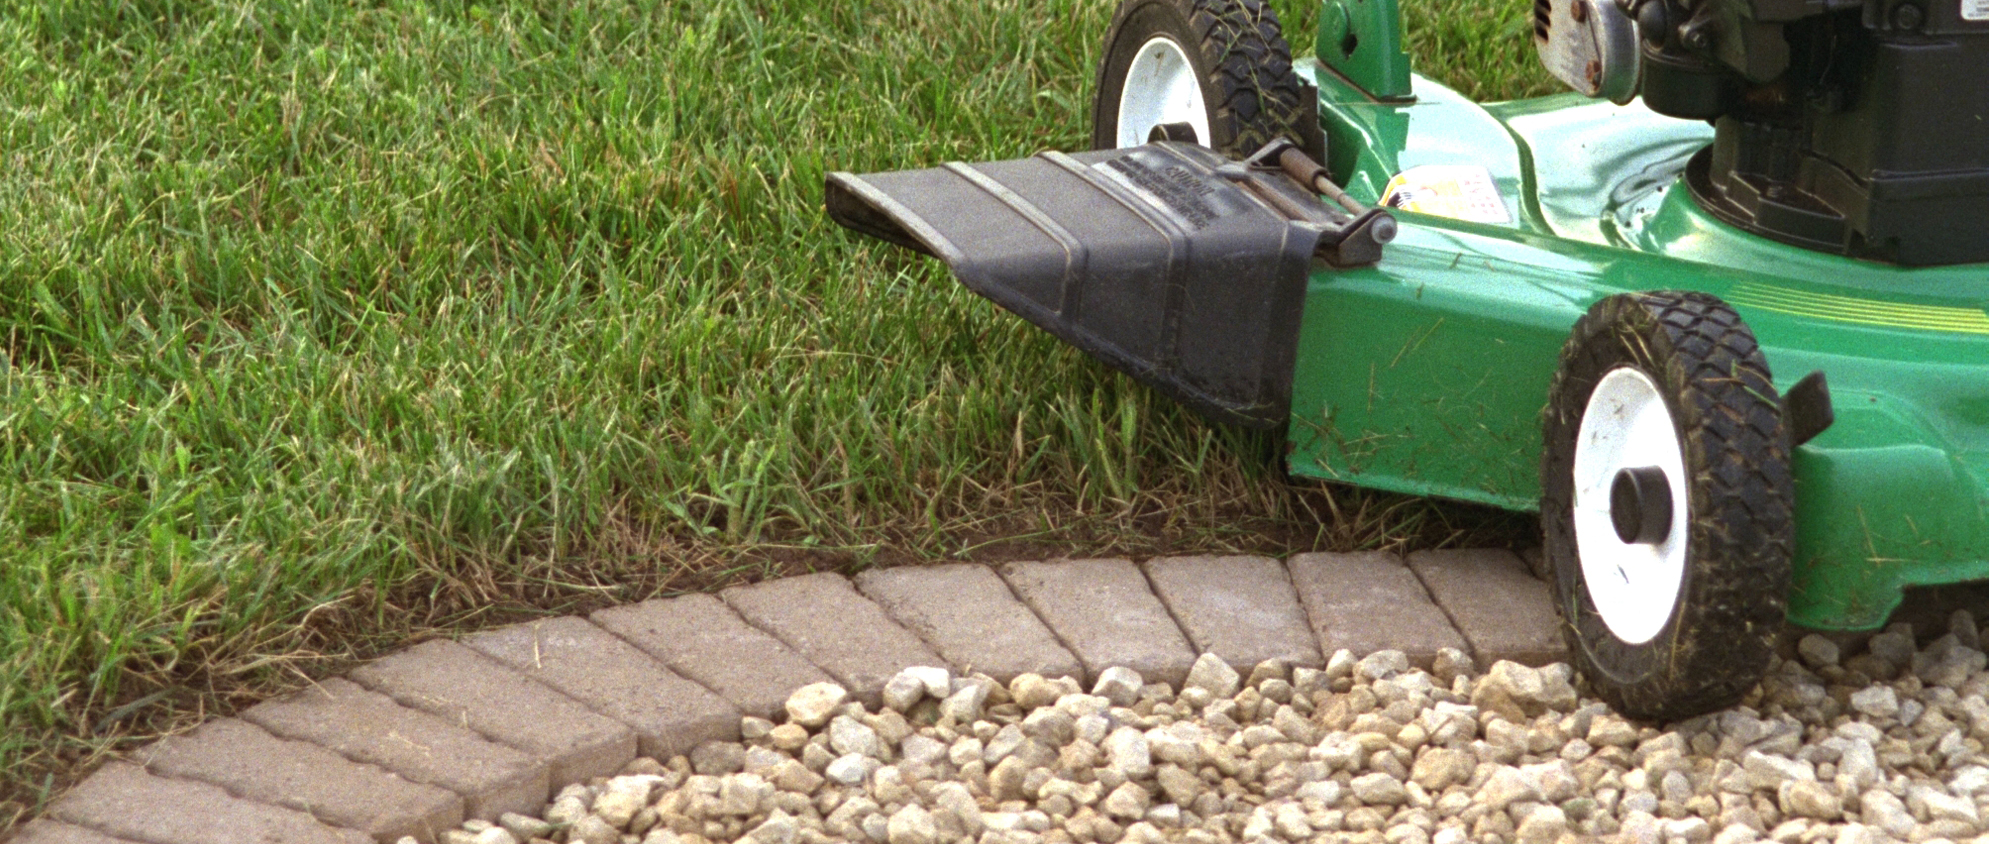 Add a row of pavers around a planting area for easy mowing without having to trim